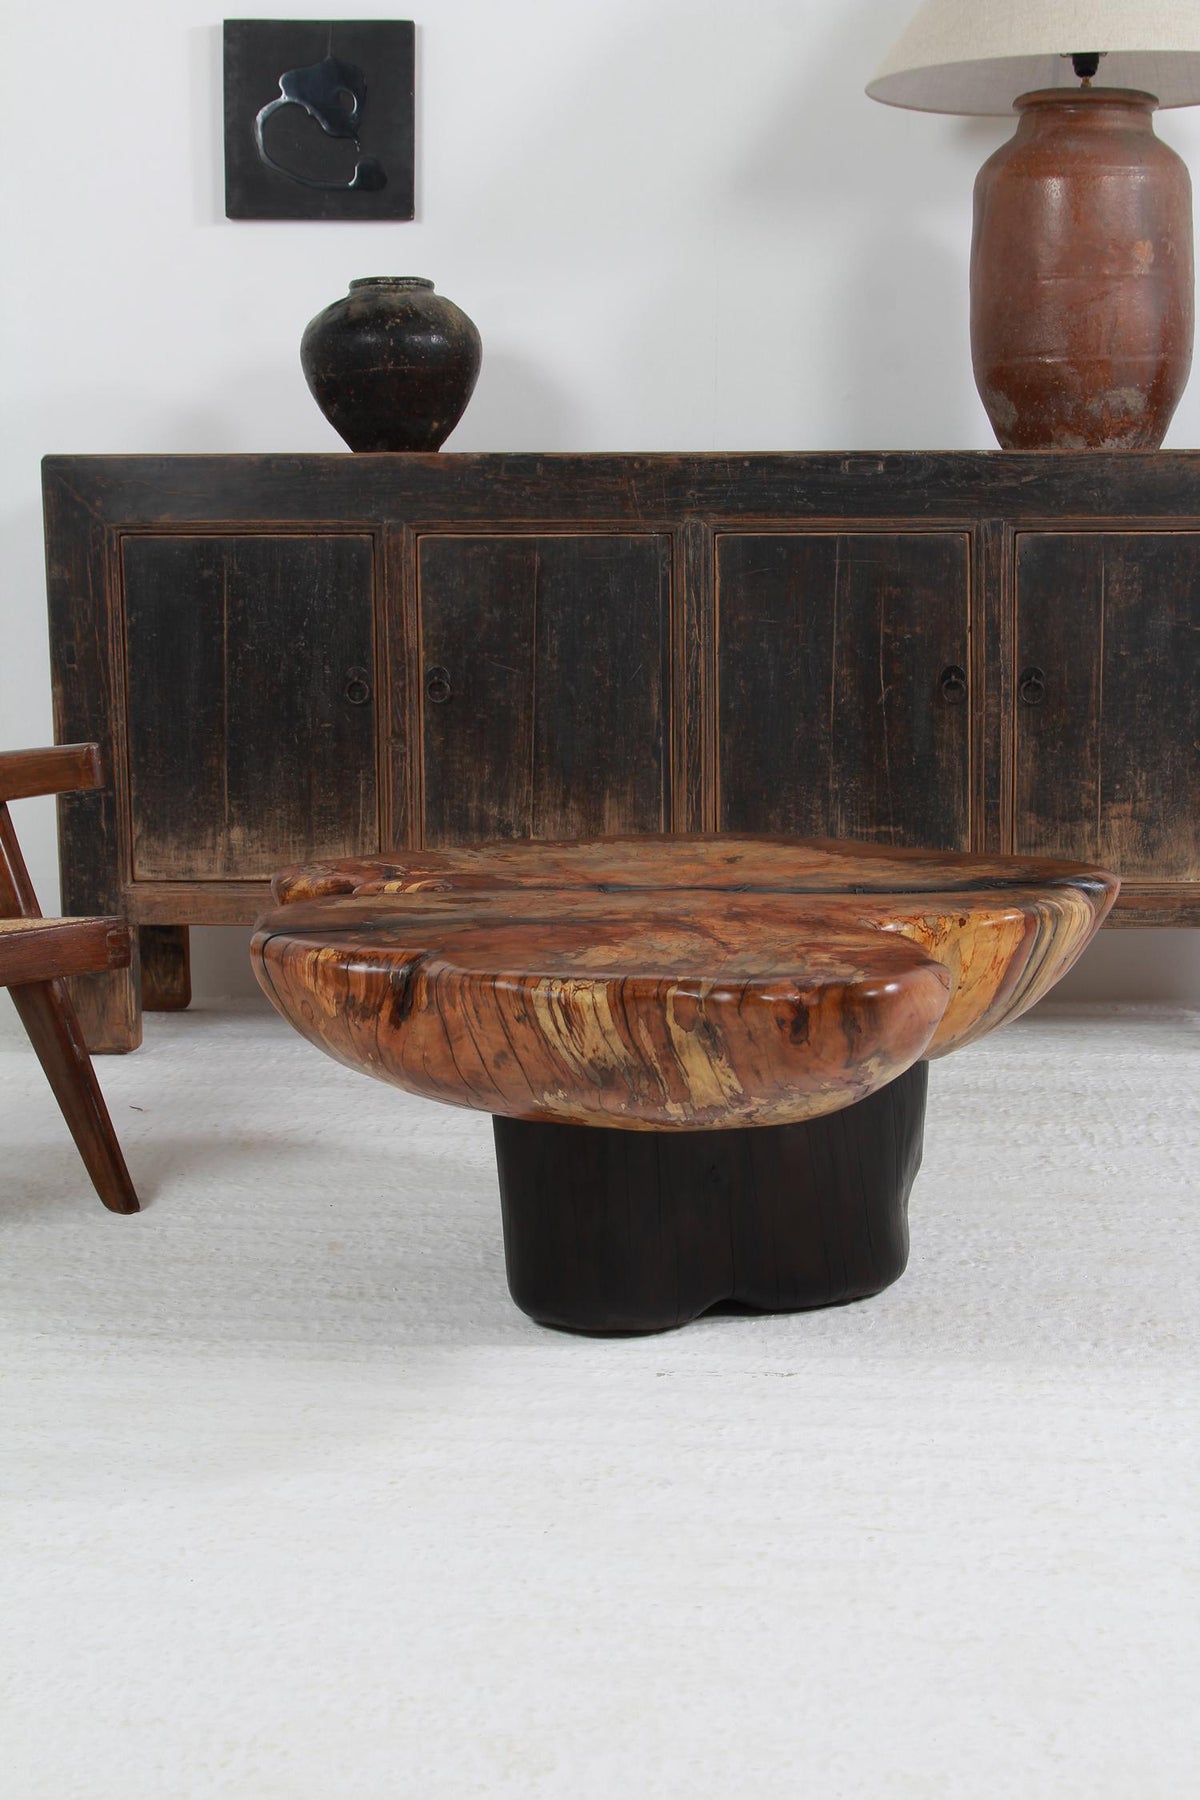 UNIQUE EXPRESSIVE SCULPTURAL CRAFTSMAN   BEECH  & CYPRESS  PEBBLE COFFEE TABLE  .PRICE ON REQUEST